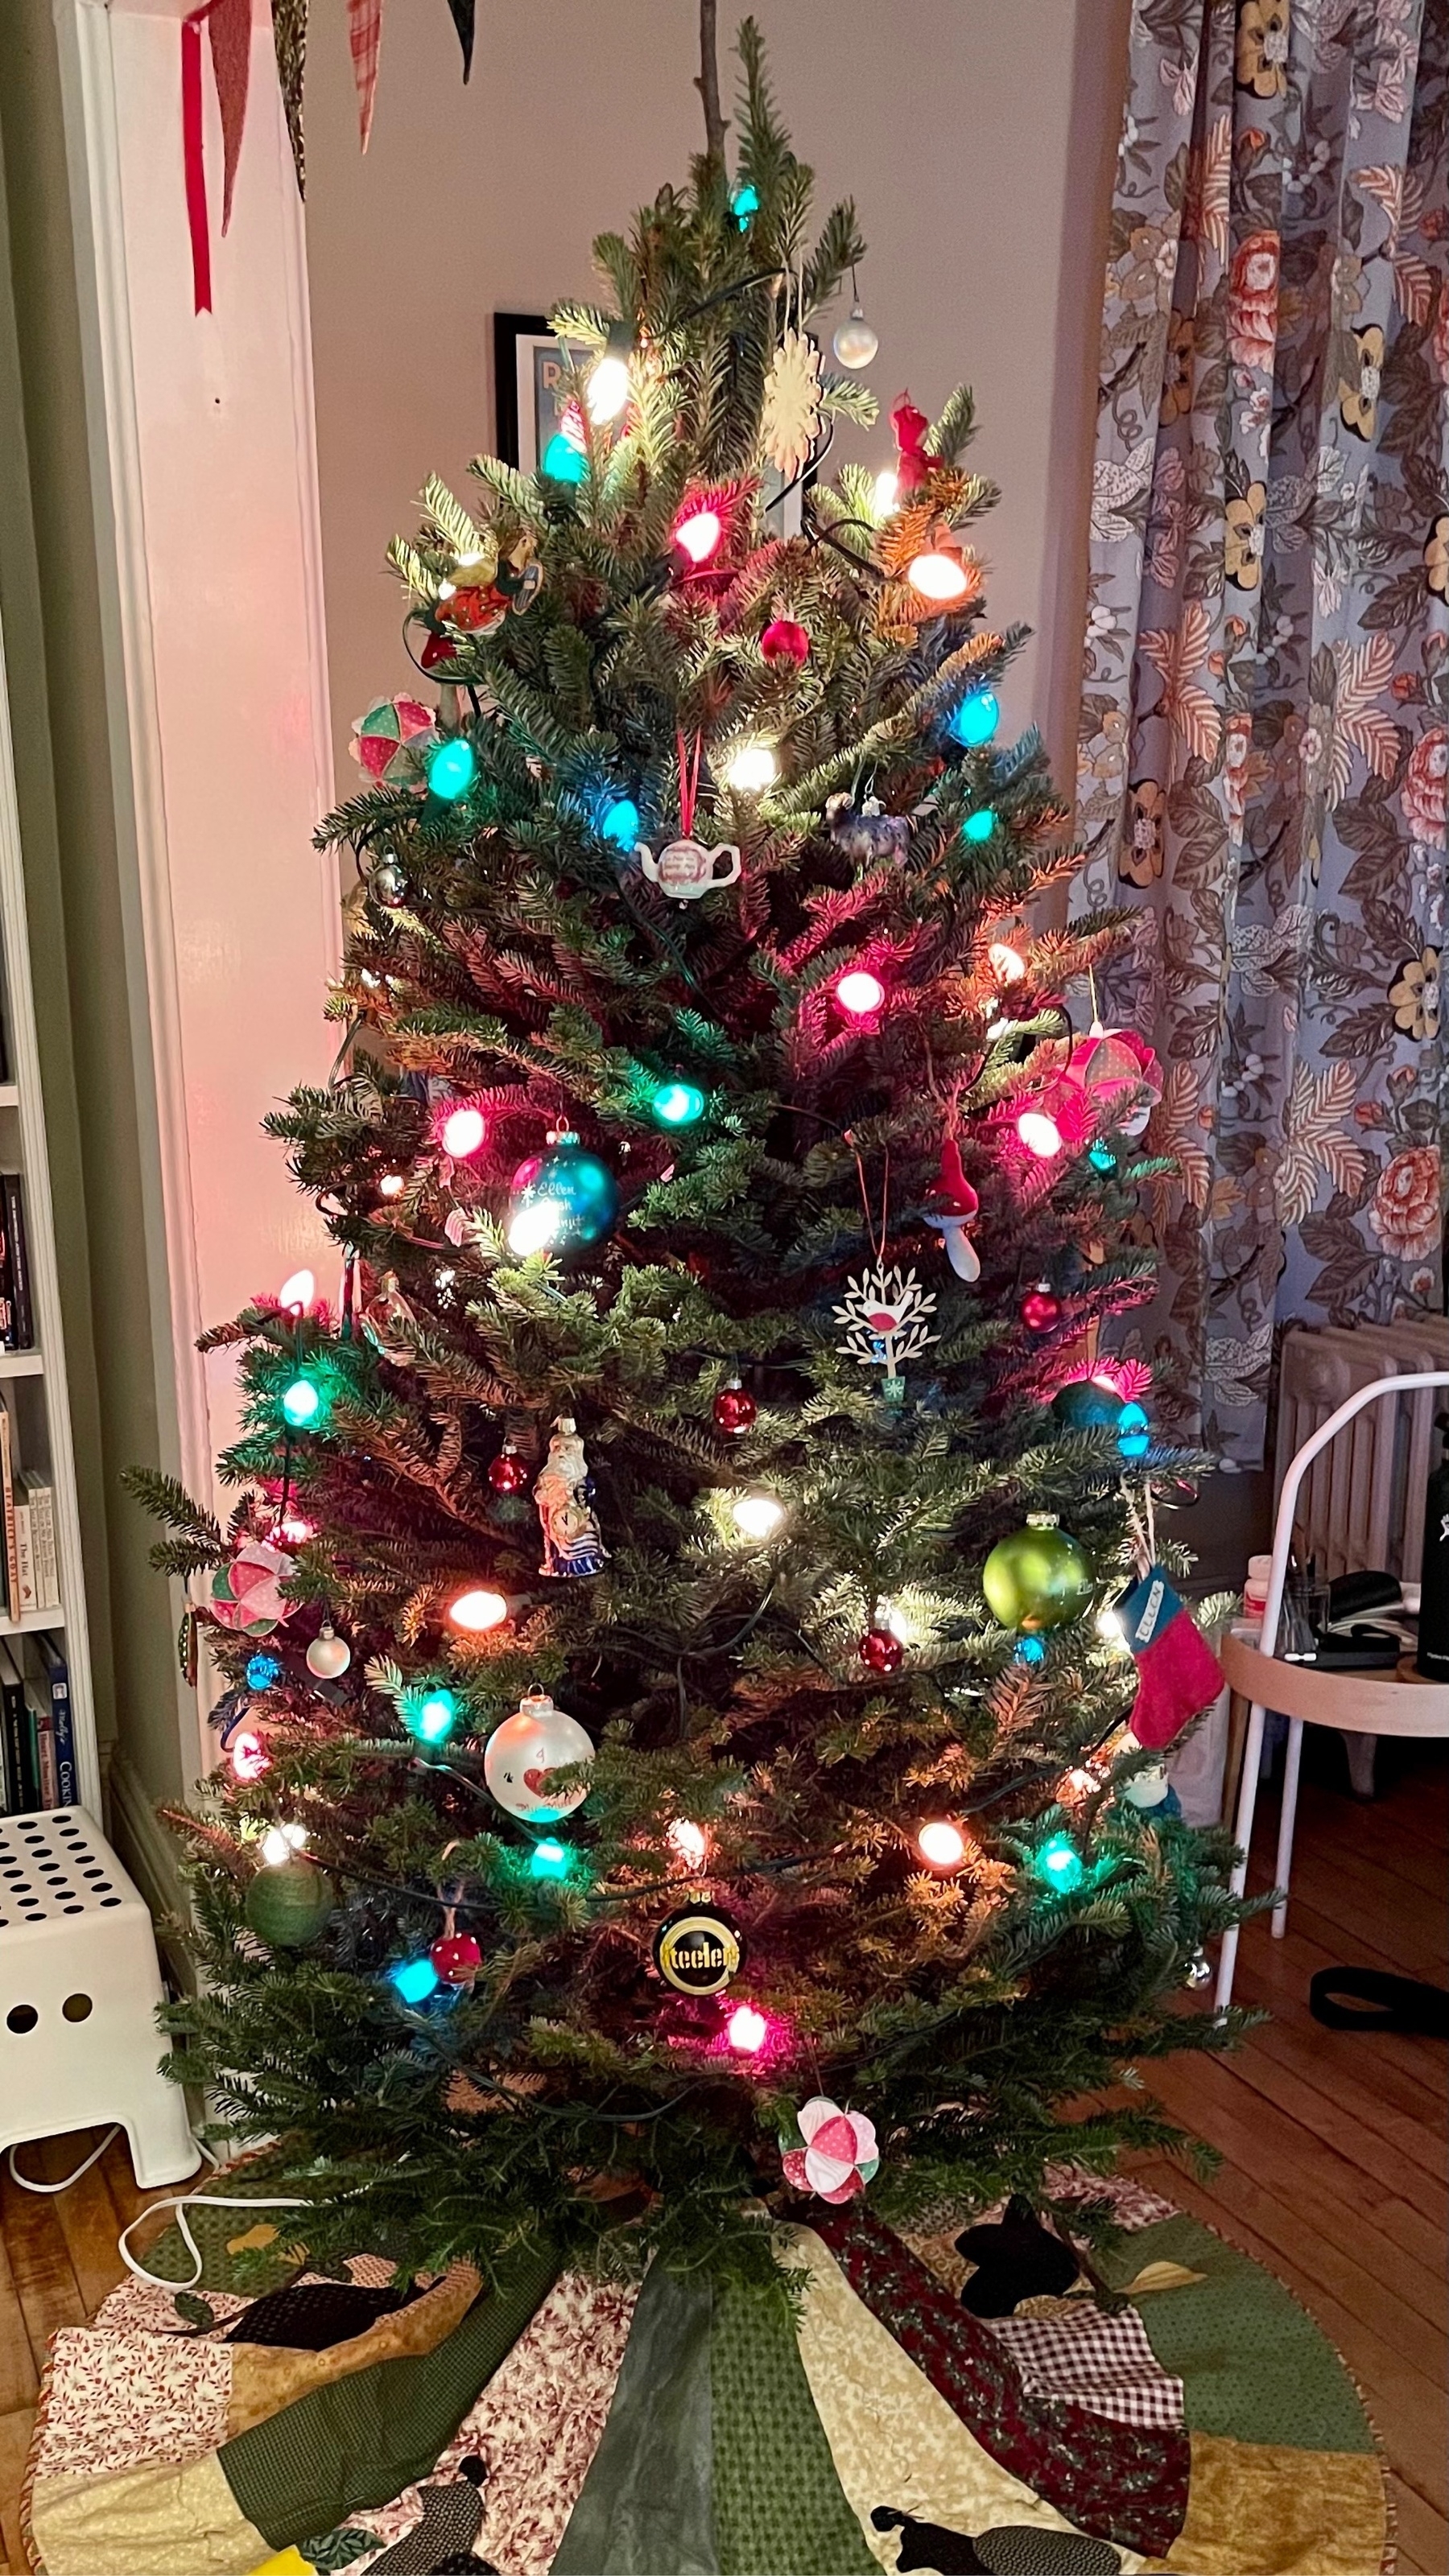 Christmas tree with ornaments and colored lights